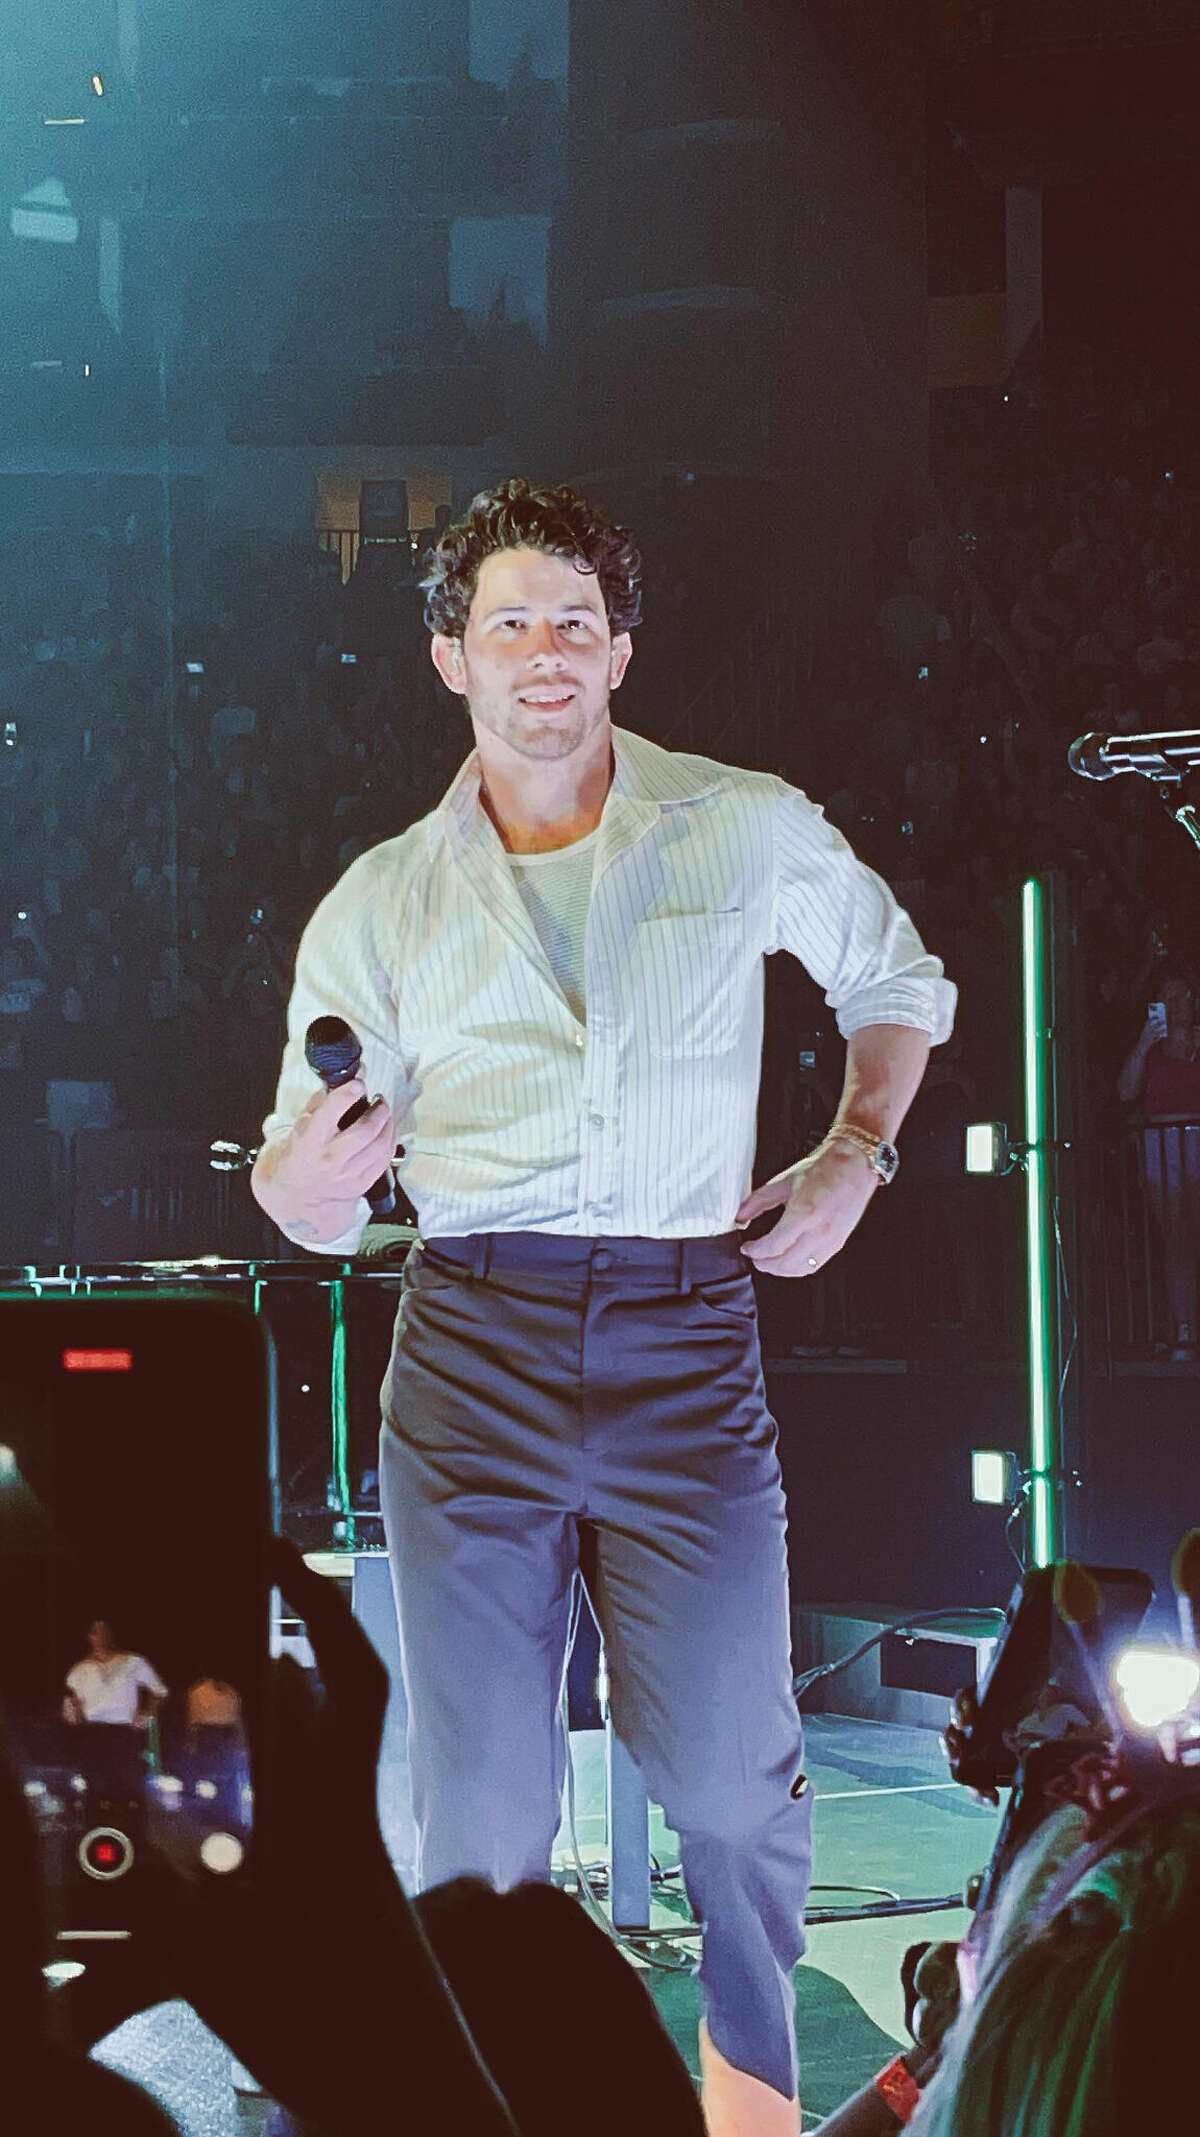 The Jonas Brothers onstage in Houston, Oct. 7, 2023 at Toyota Center.